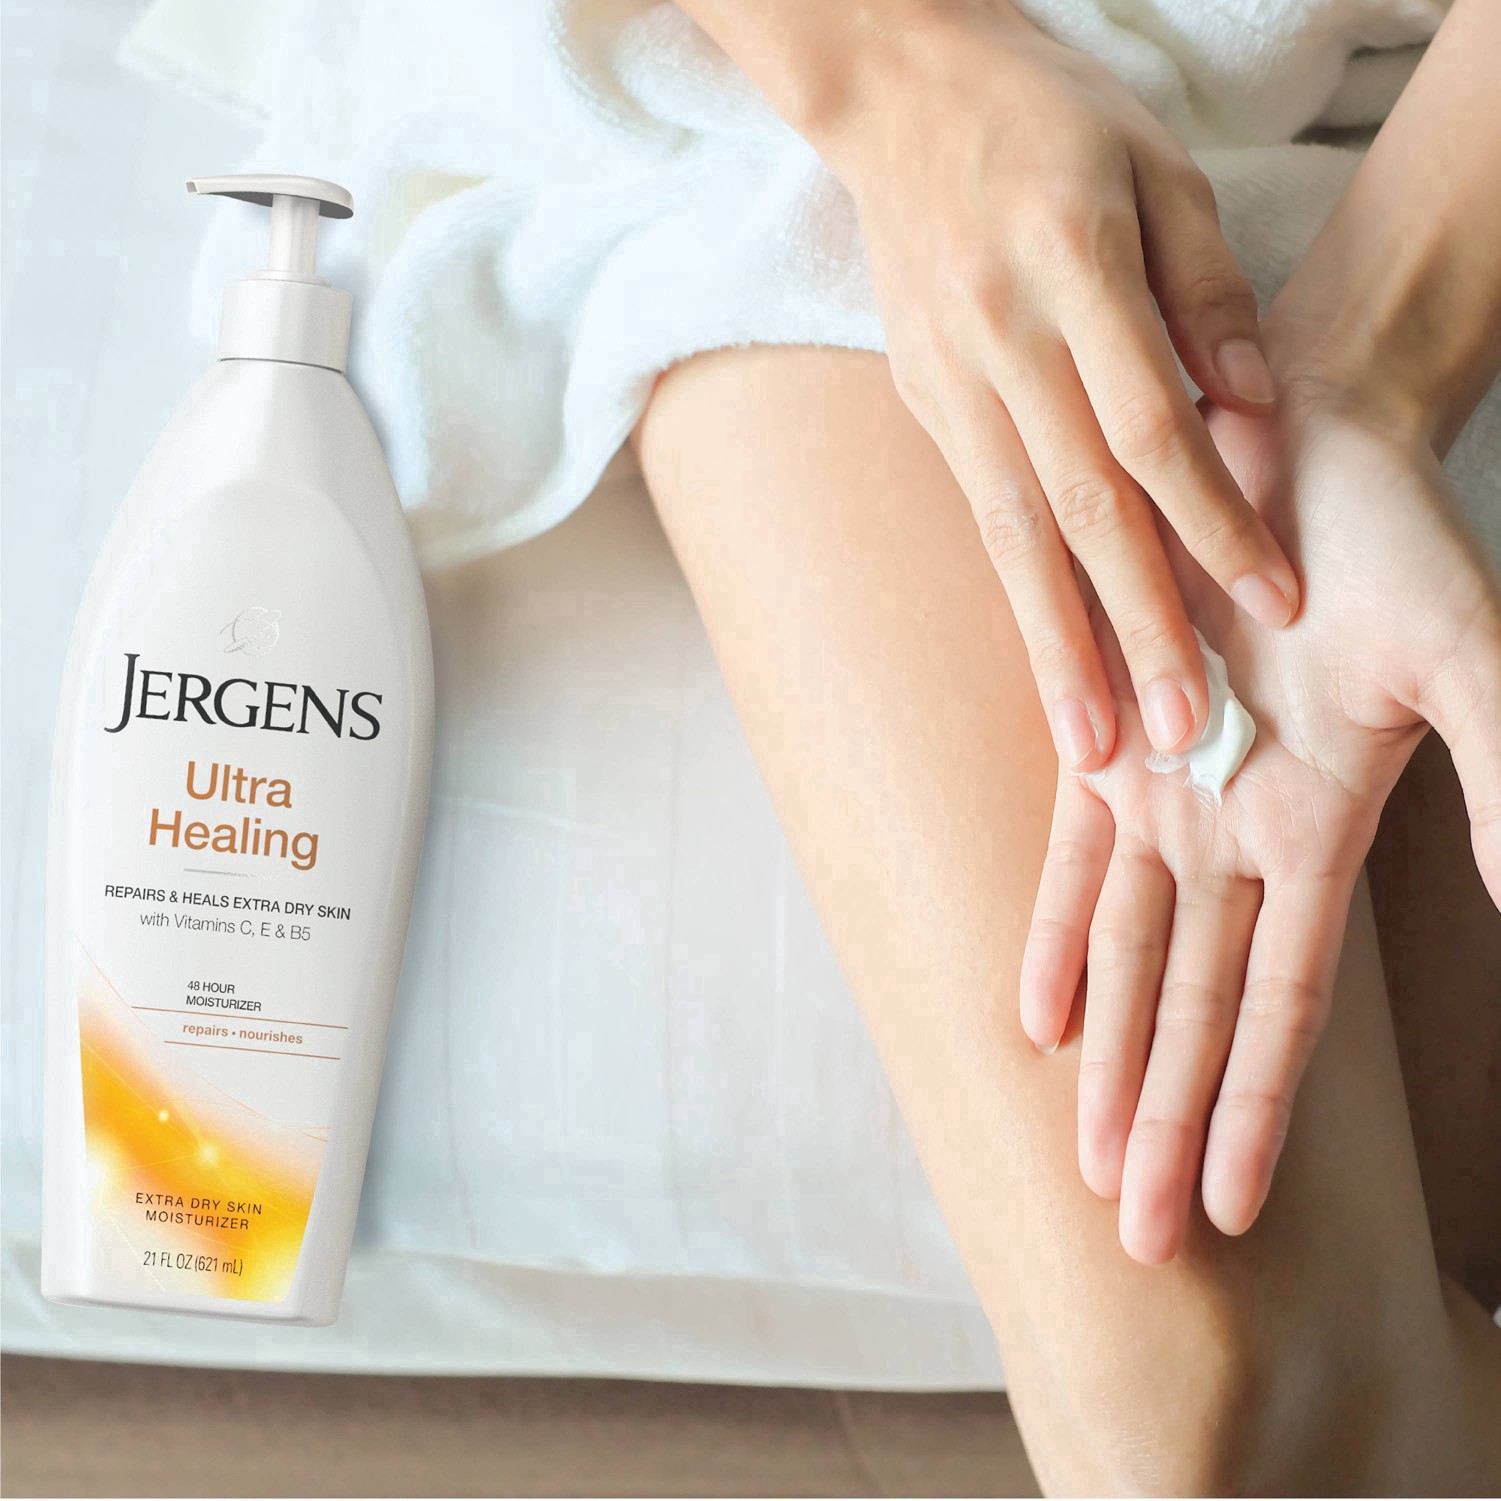 slide 14 of 67, Jergens Hand and Body Lotion, Dry Skin Moisturizer with Vitamins C,E, and B5, 21 fl oz